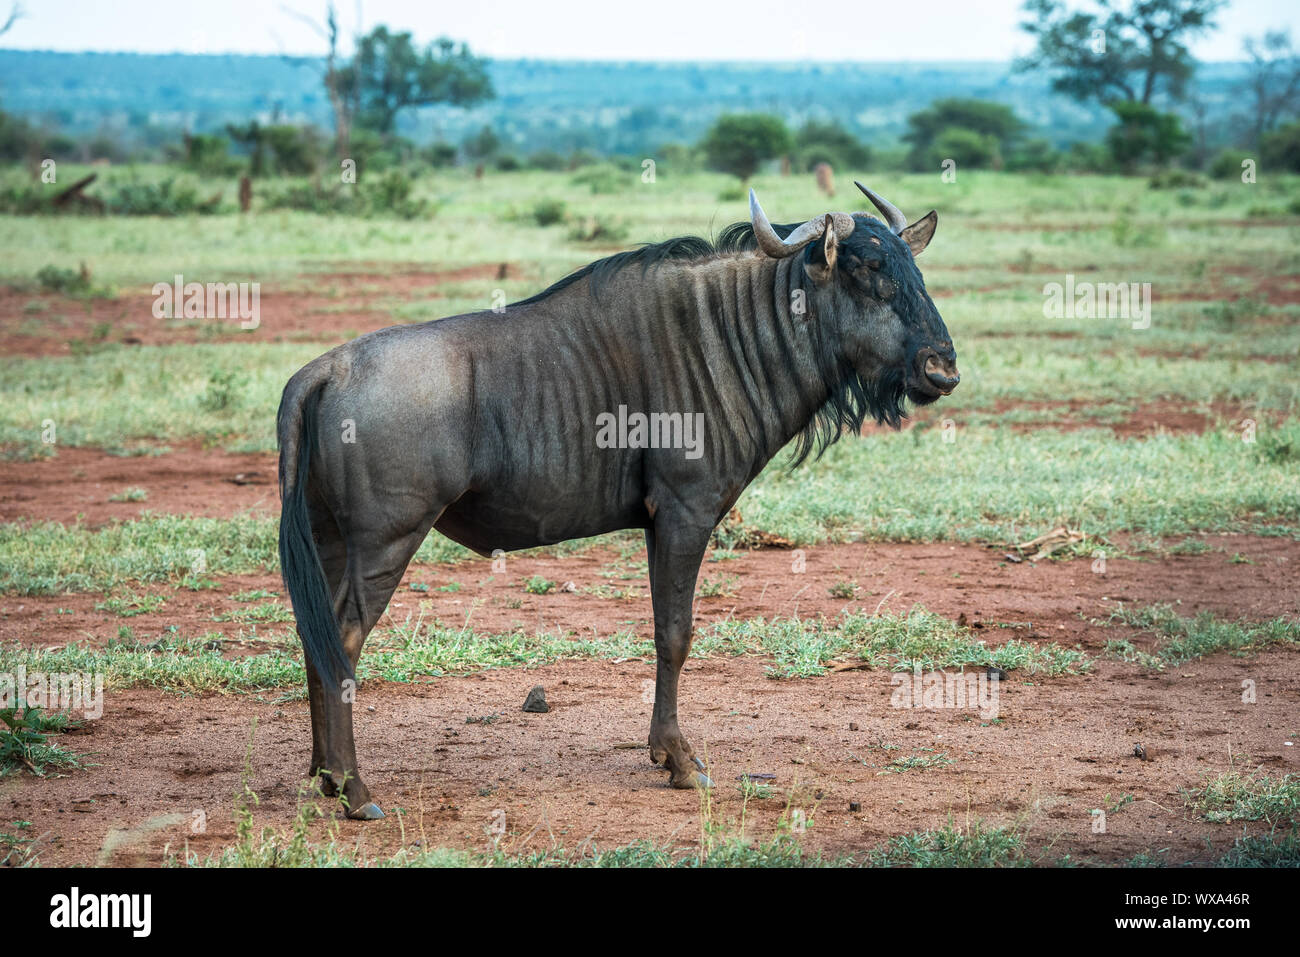 Blue wildebeest in Kruger National Park, South Africa Stock Photo